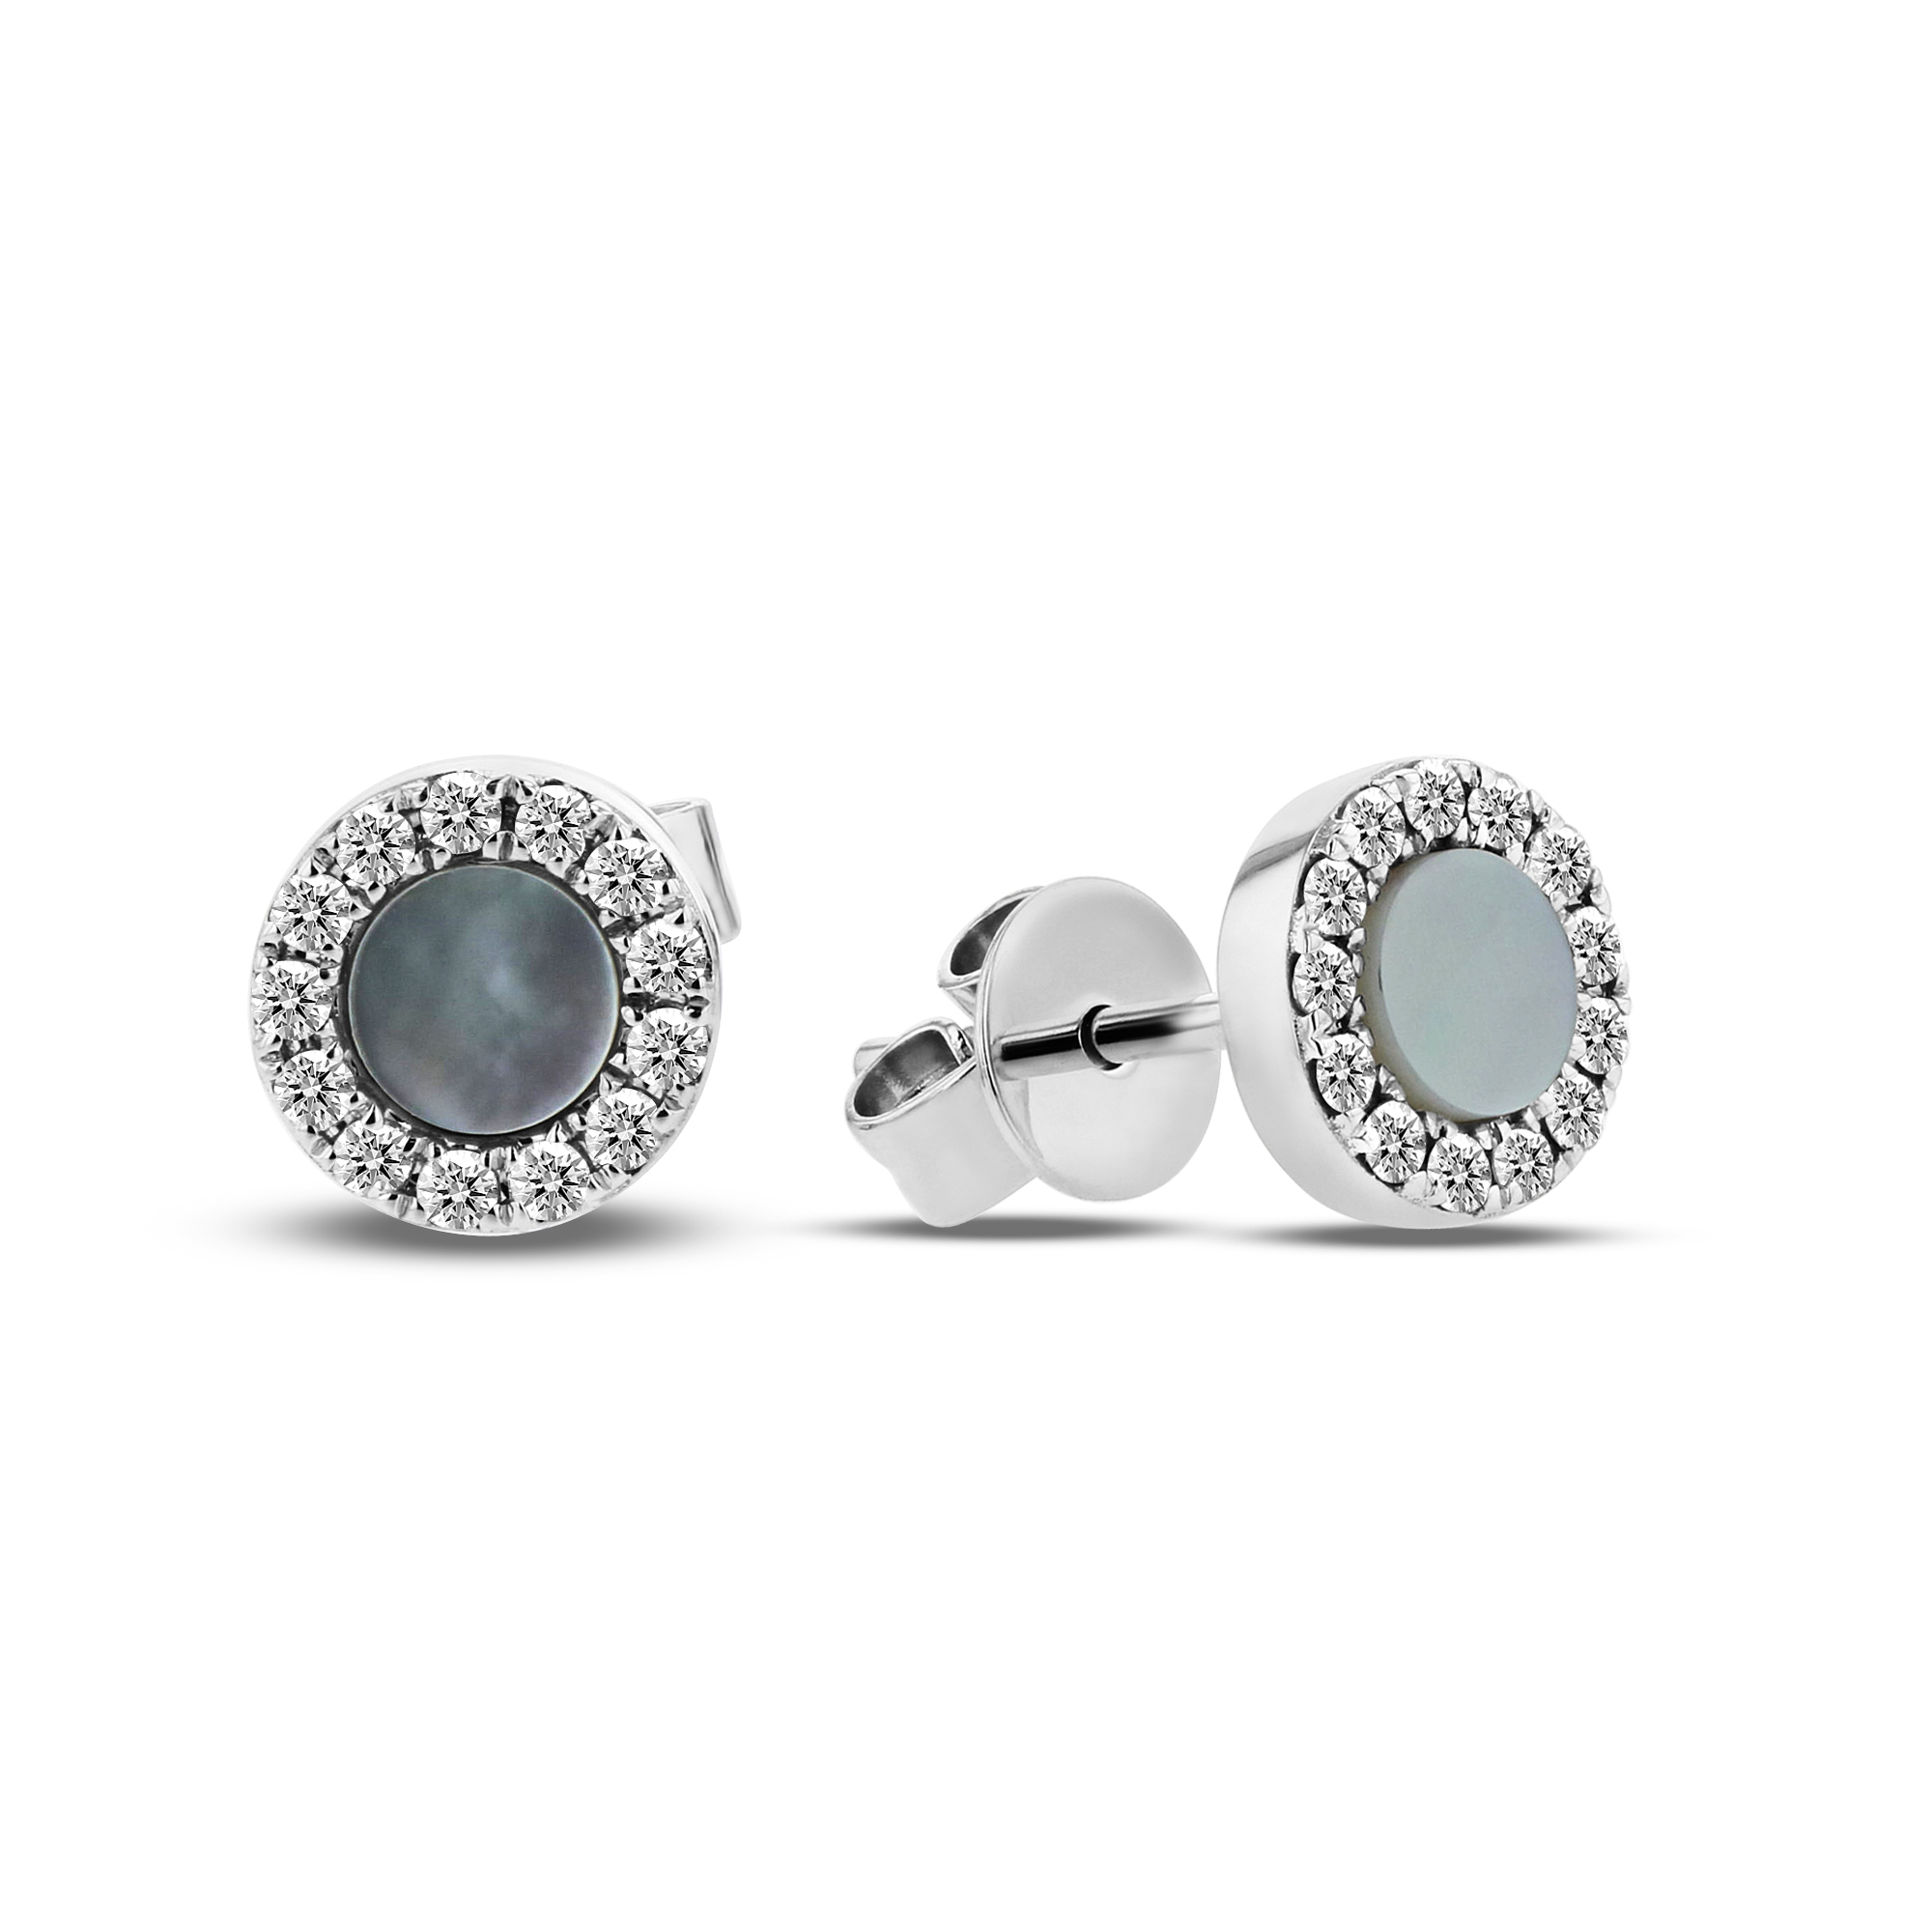 0.16ctw Diamond and Mother of Pearl Earrings in 14k White Gold